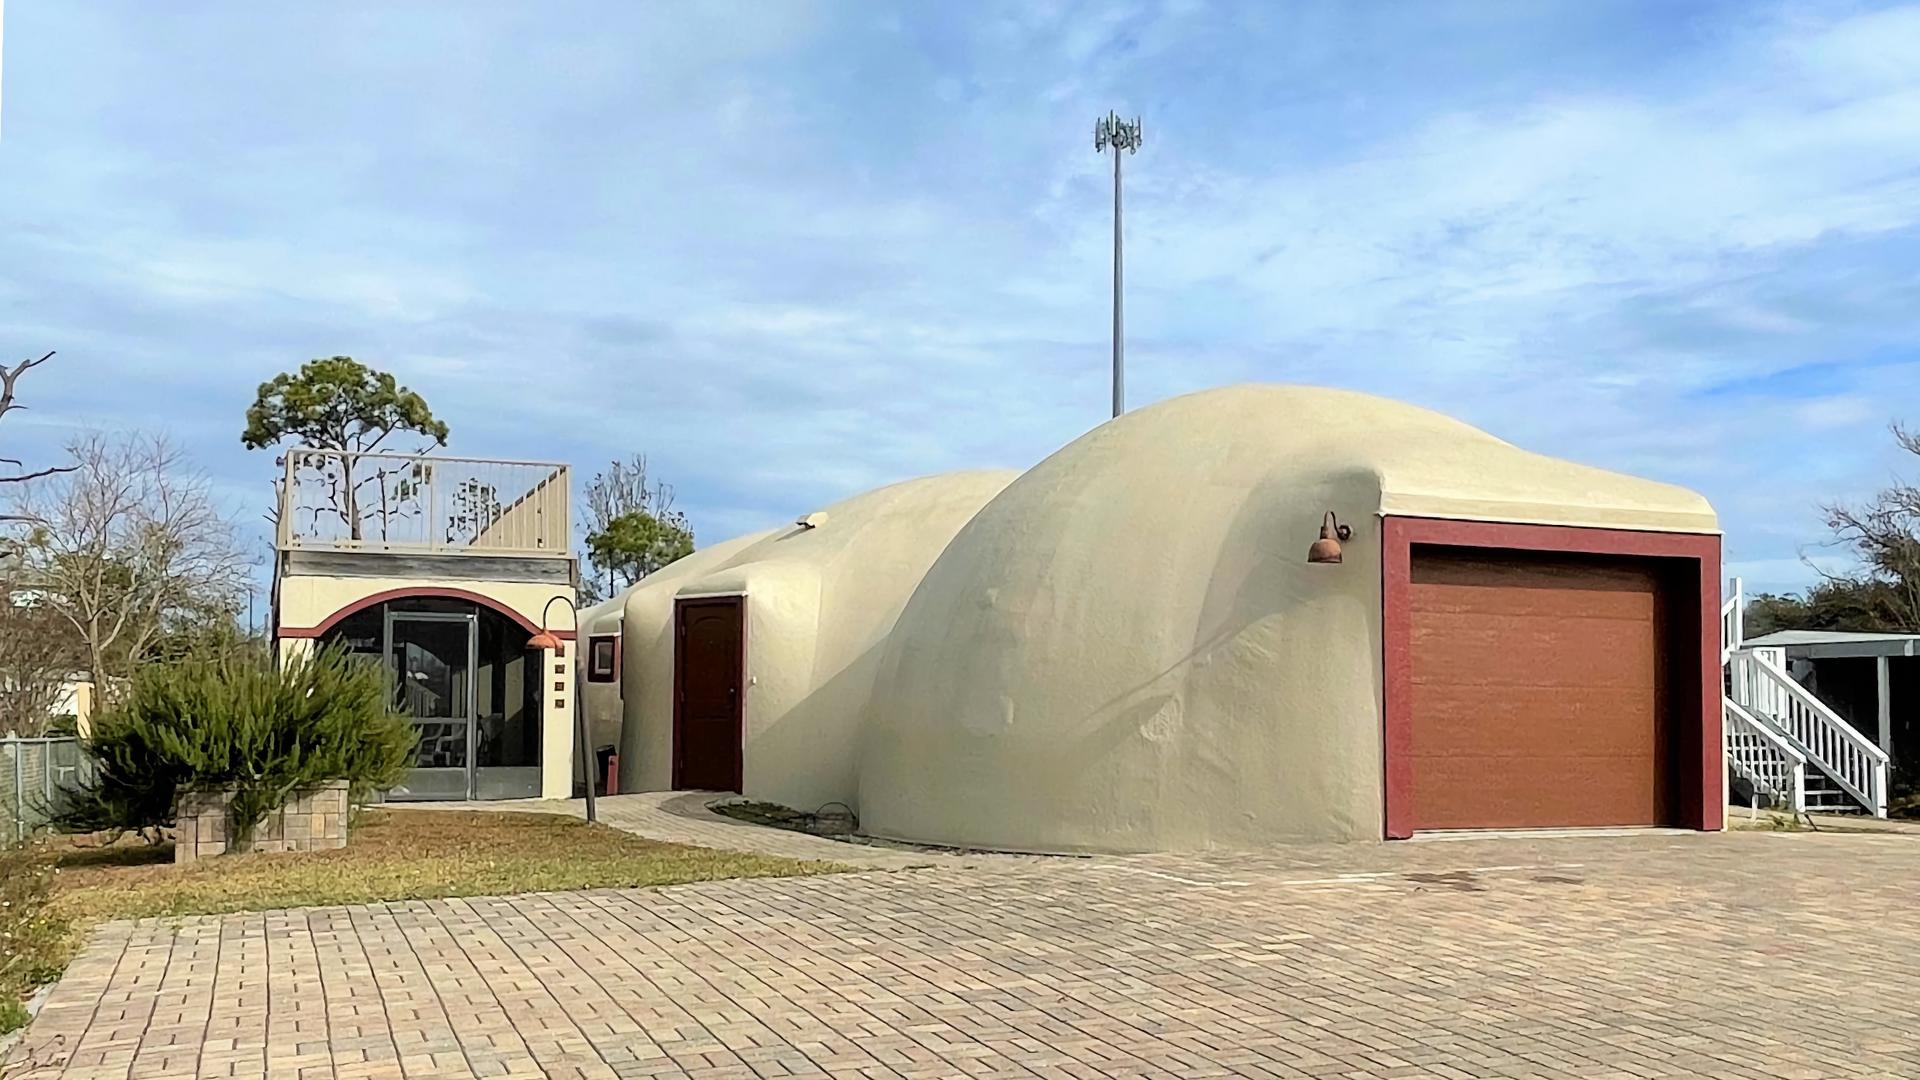 The caterpillar shaped design of Golden Eye dome home.